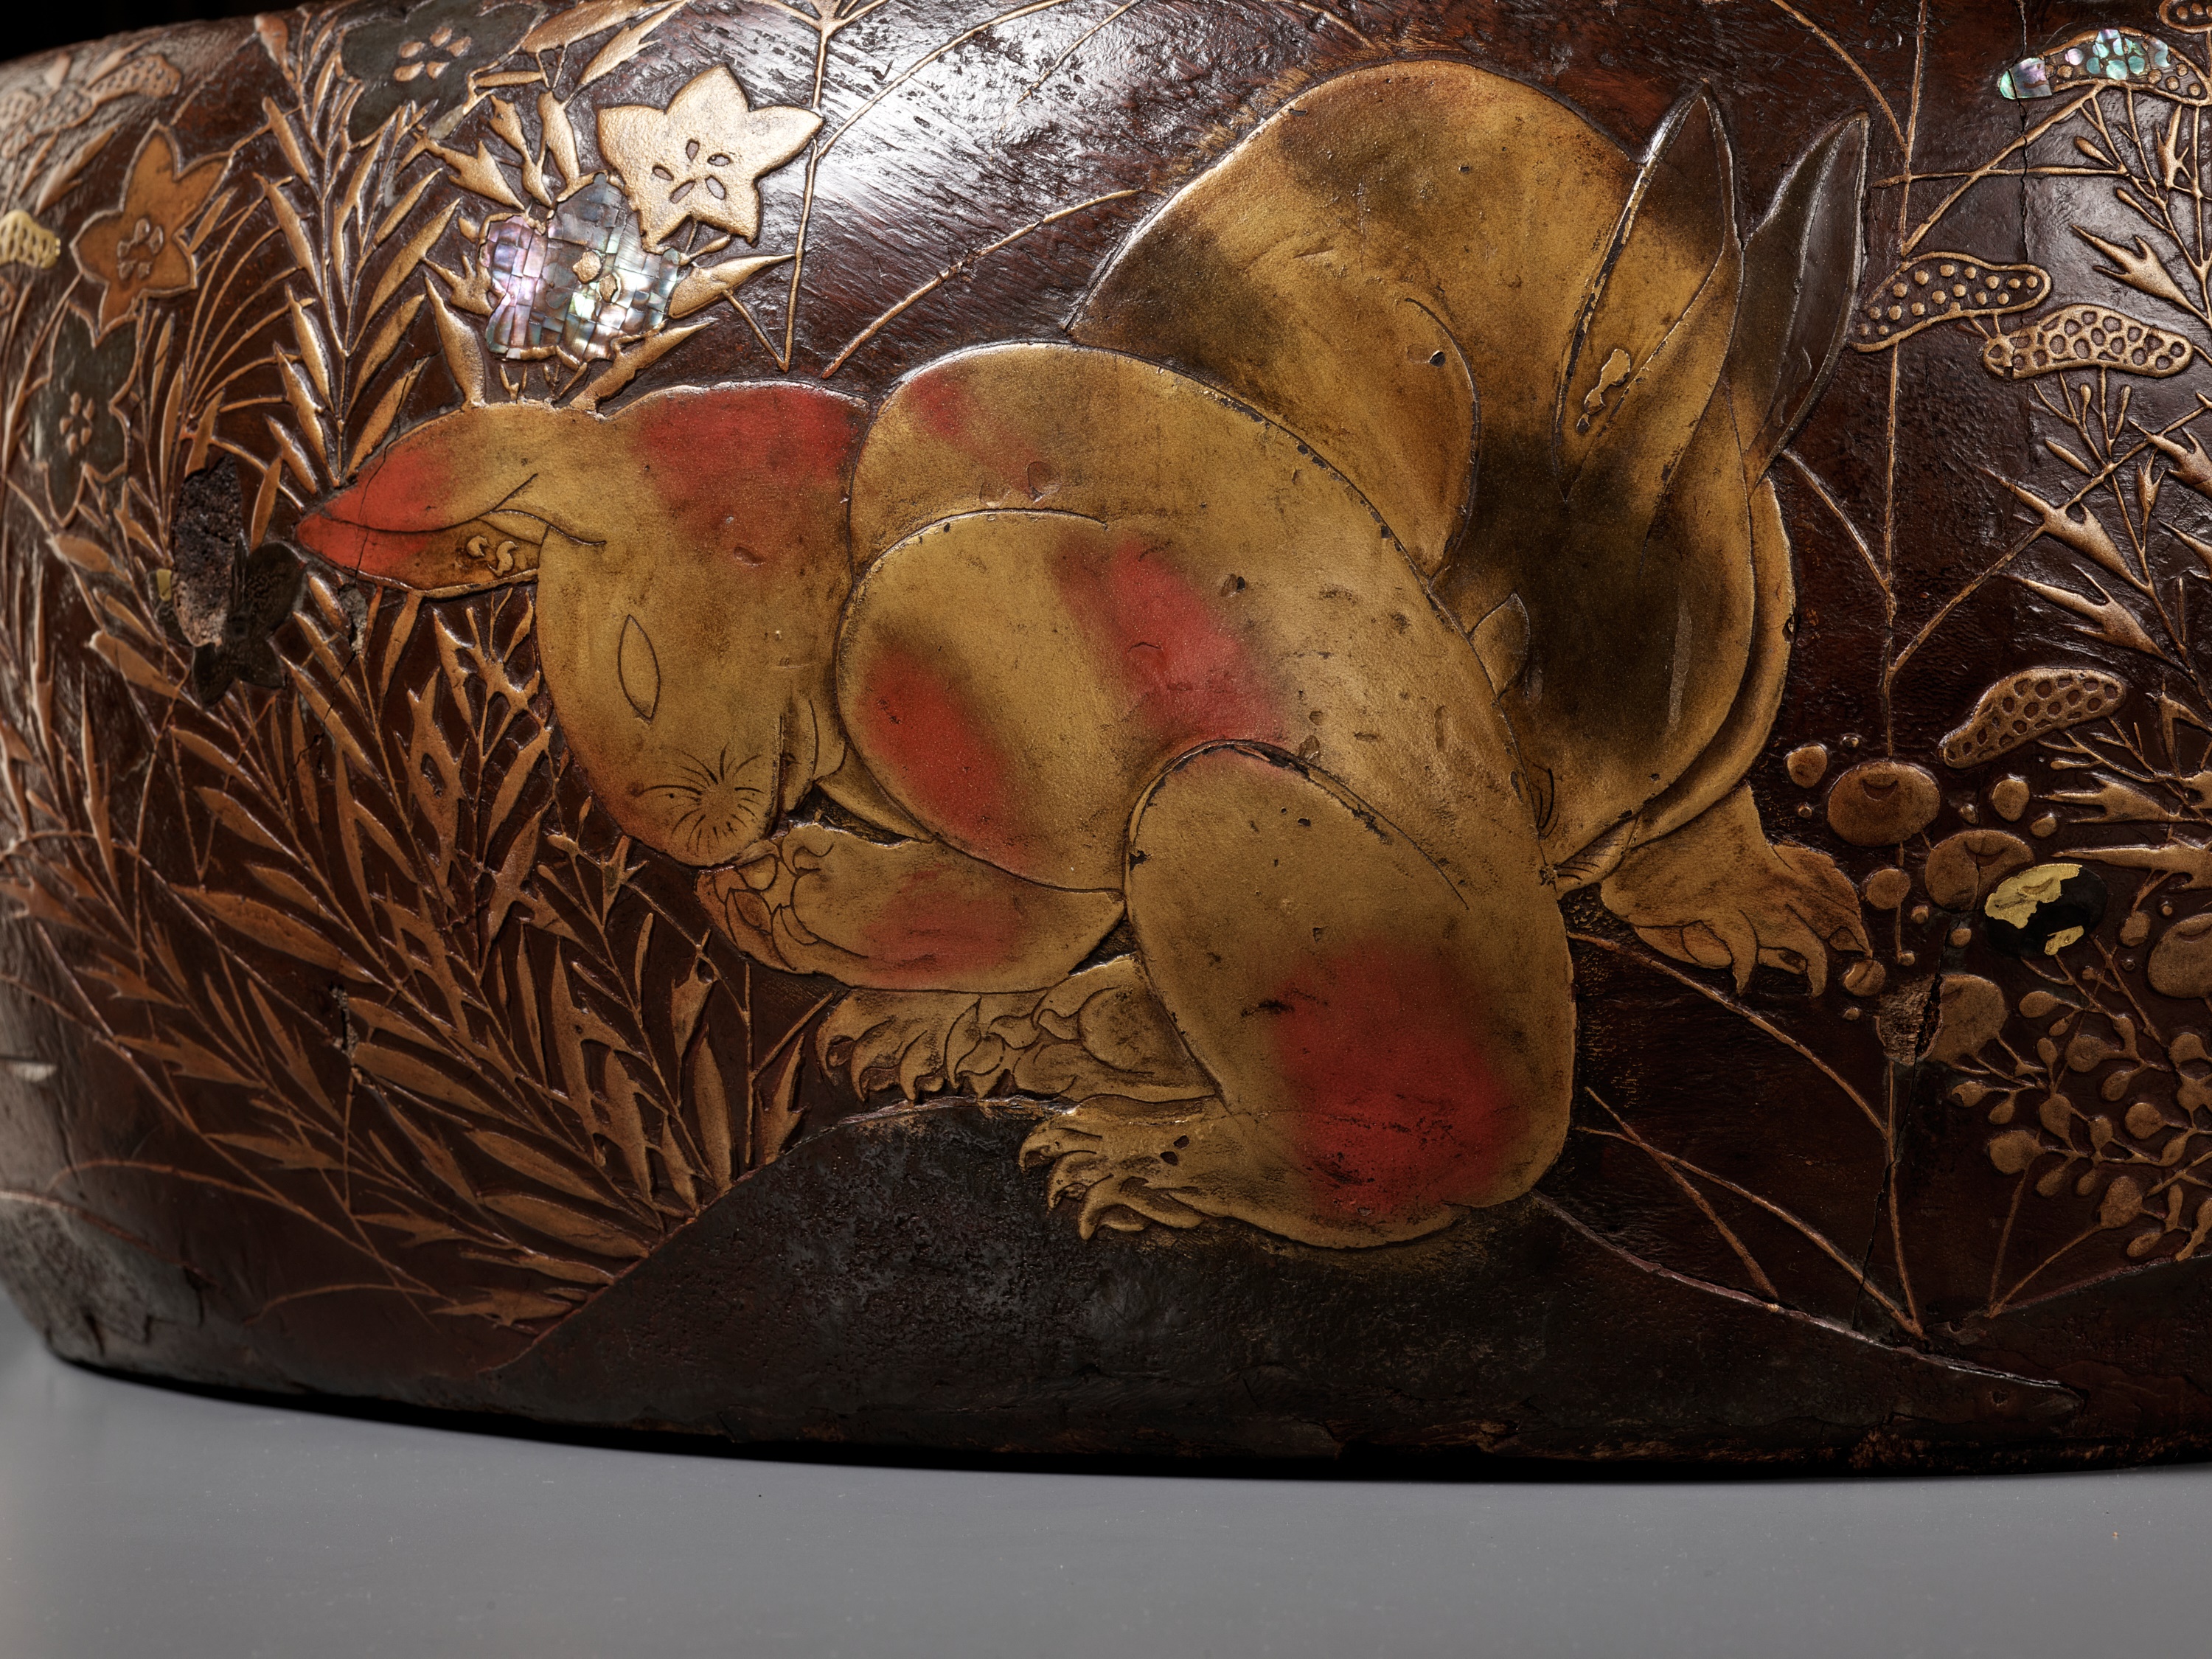 A LARGE RIMPA STYLE LACQUERED AND INLAID PAULOWNIA WOOD HIBACHI (BRAZIER) WITH LUNAR HARES - Image 2 of 14